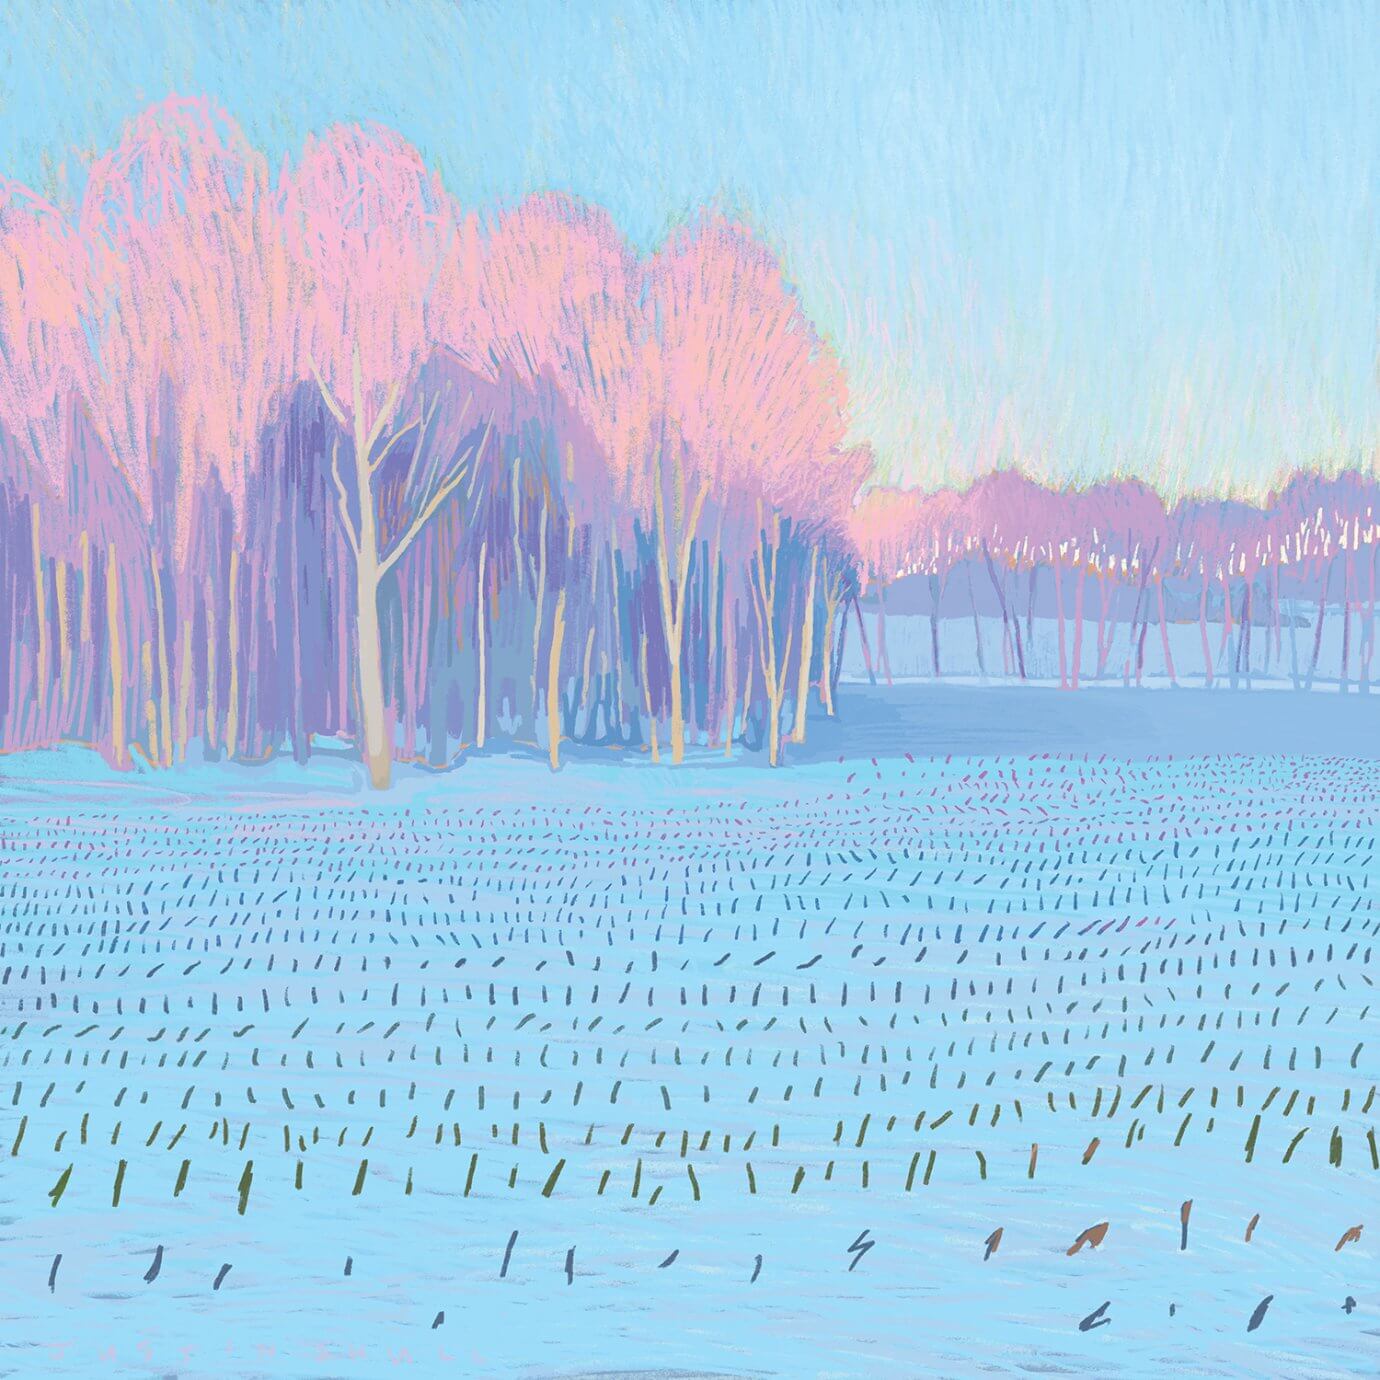 justin shull painting and digital art - pink trees and blue fields